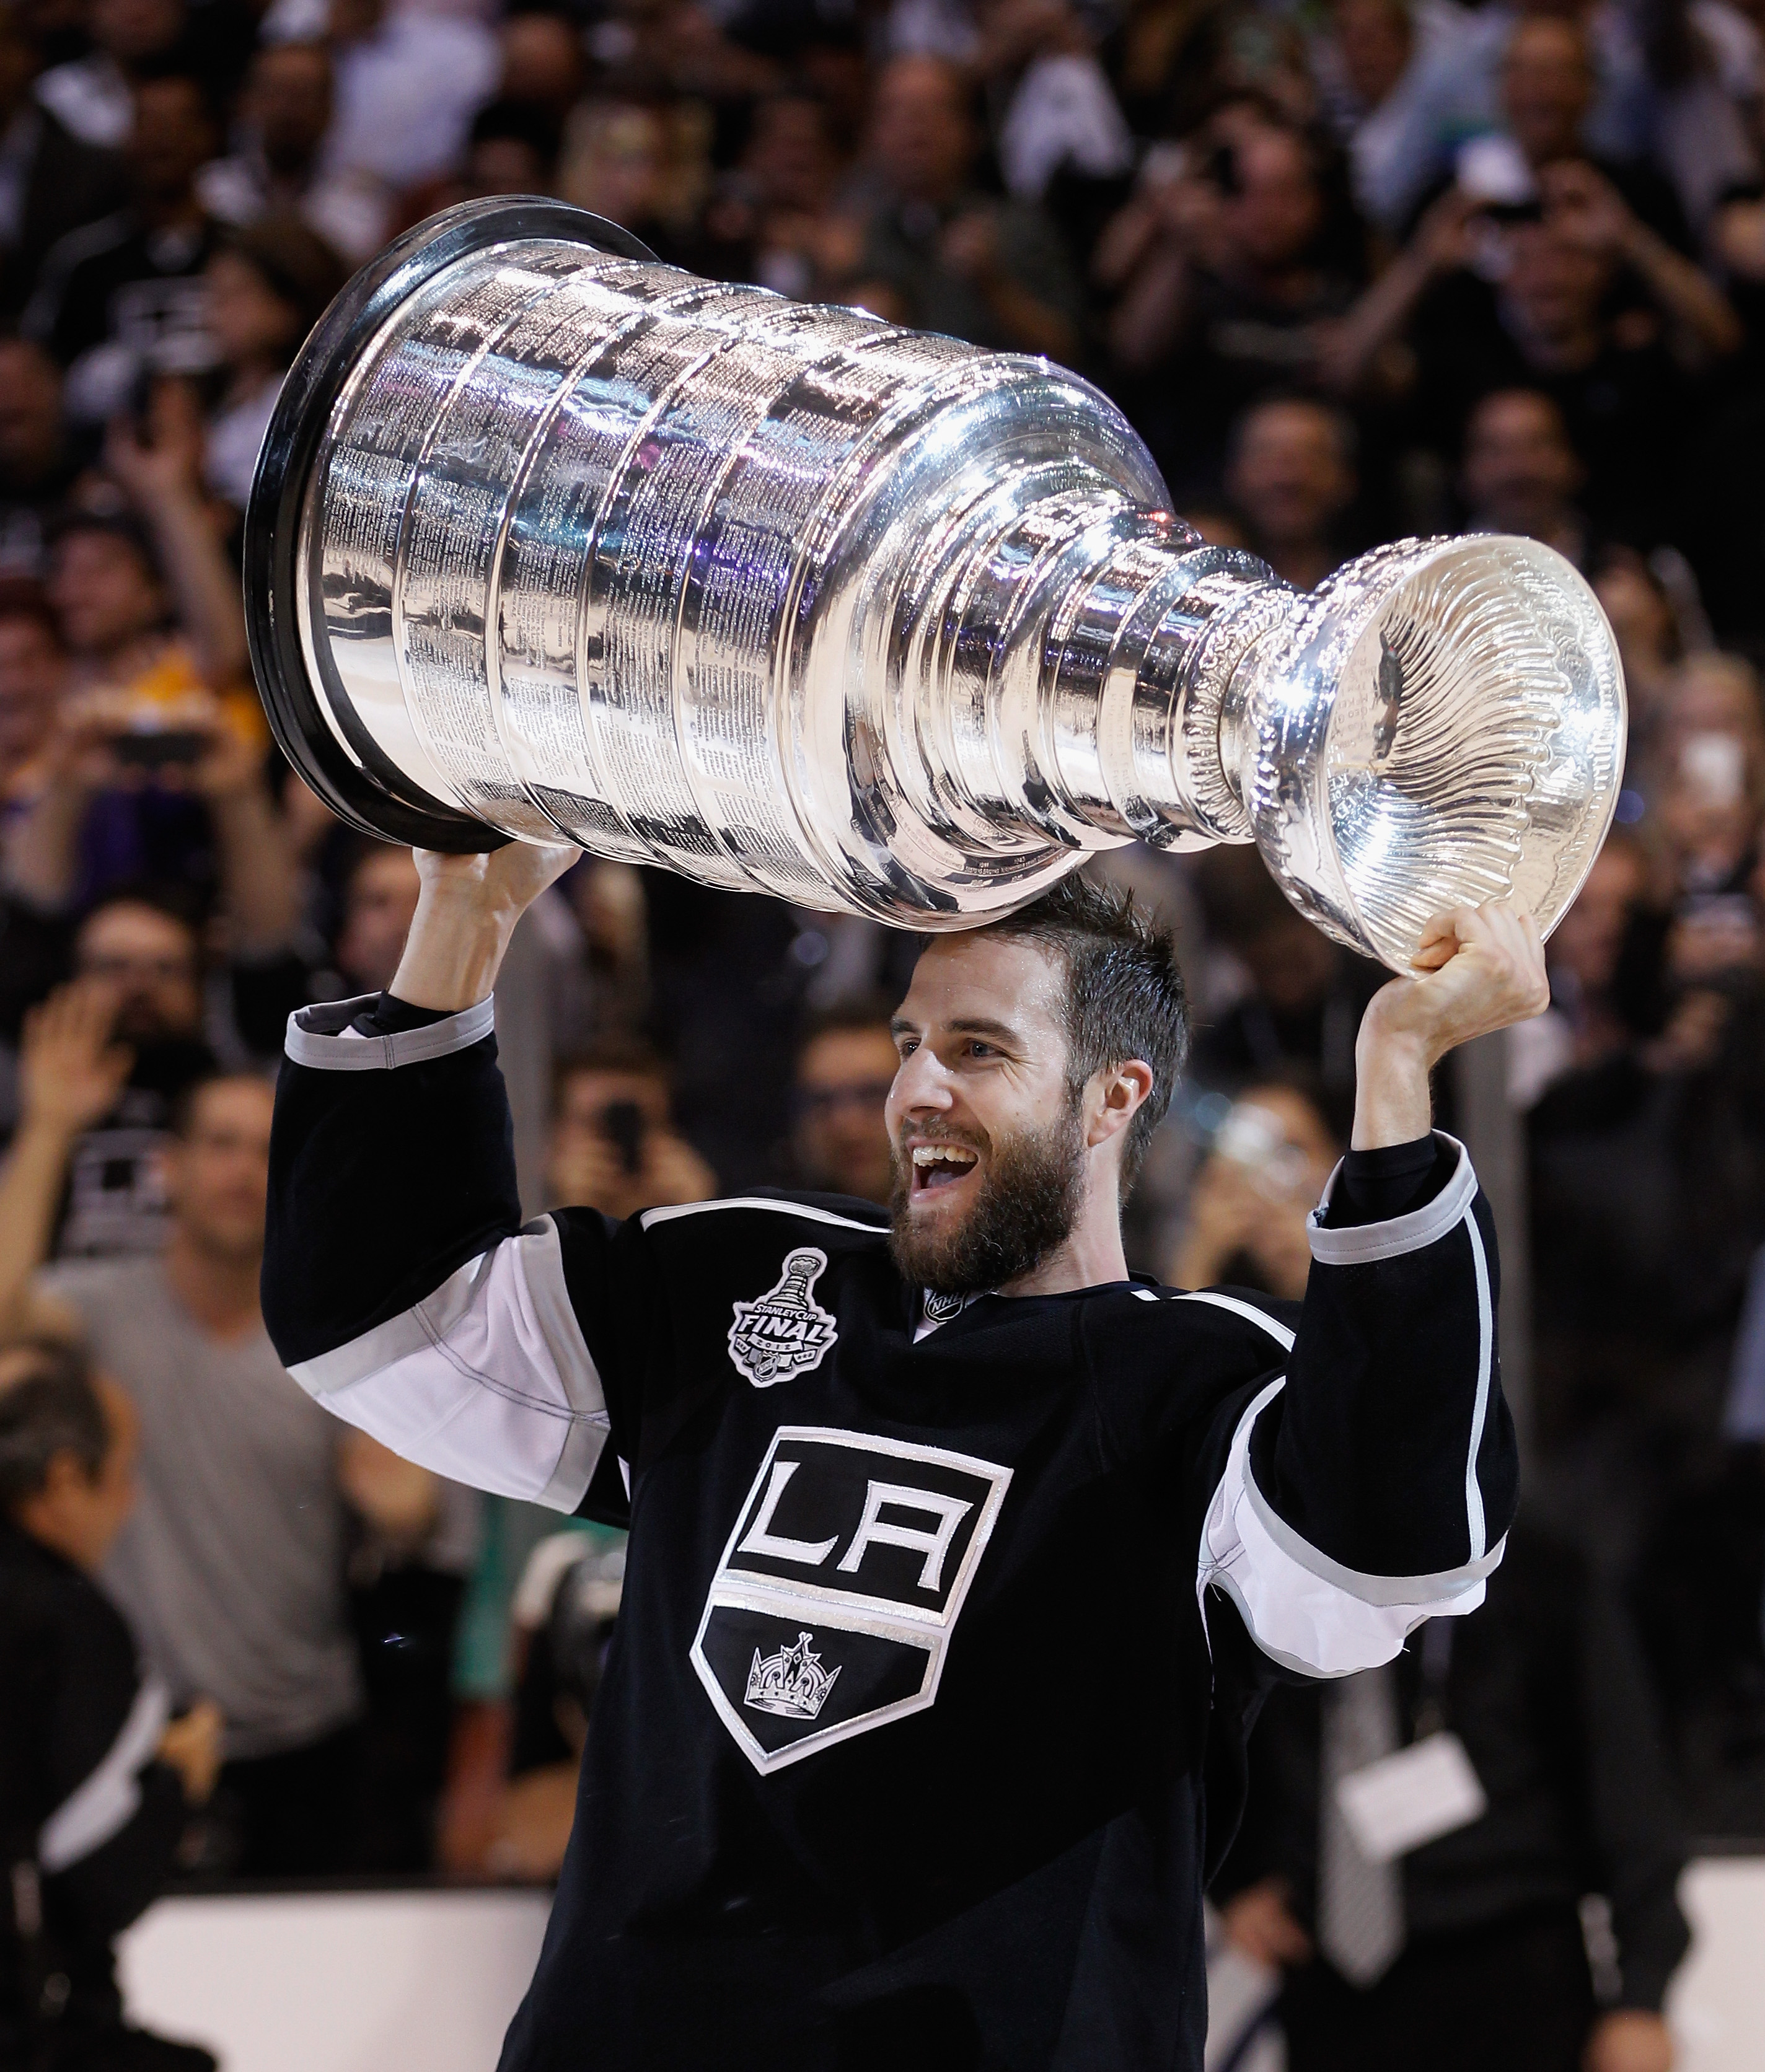 Kings Win 2012 Stanley Cup With Game 6 Blowout Of Devils - SB Nation Los  Angeles